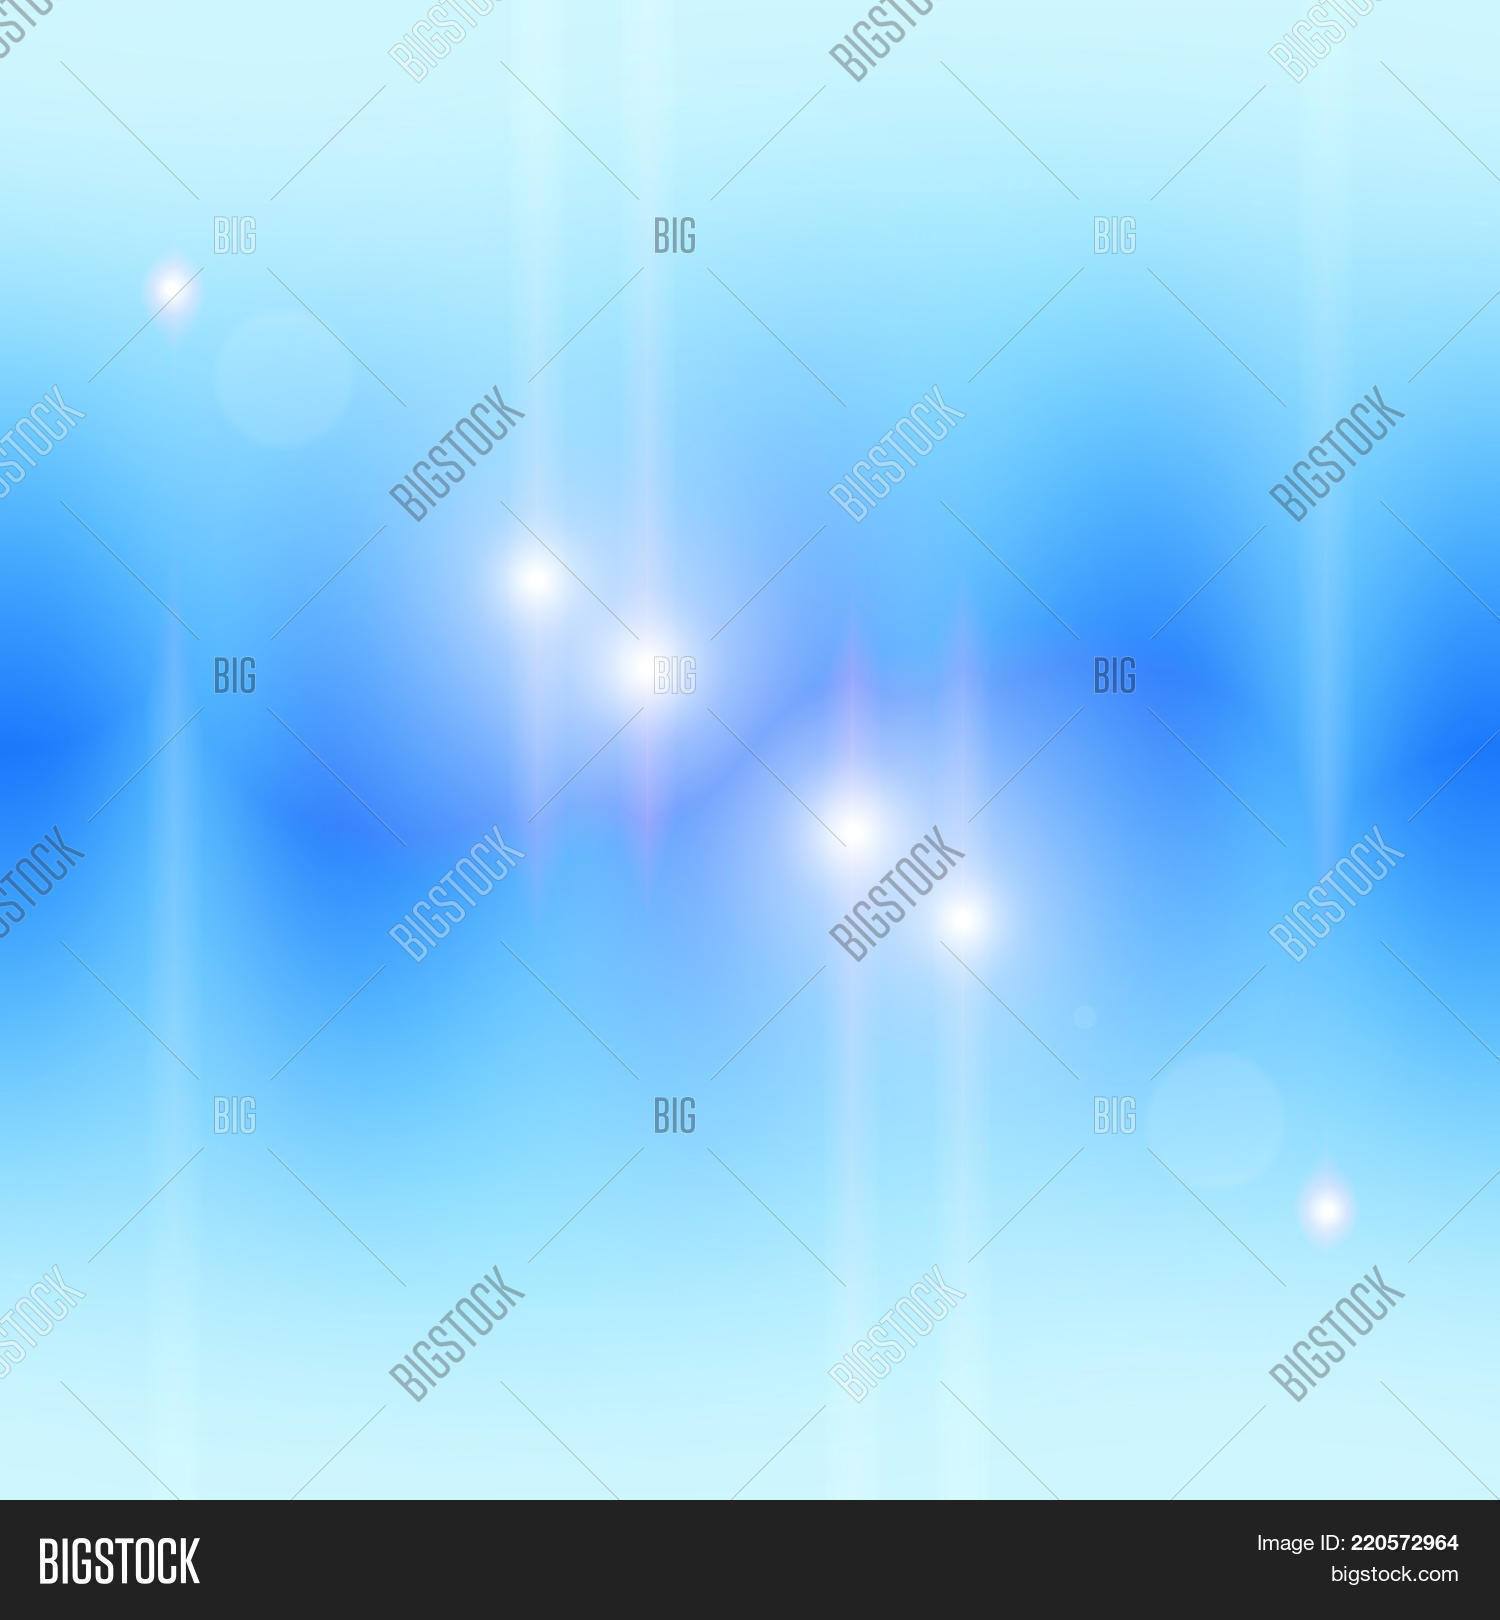 Abstract Lightning Light Effects On Image & Photo | Bigstock